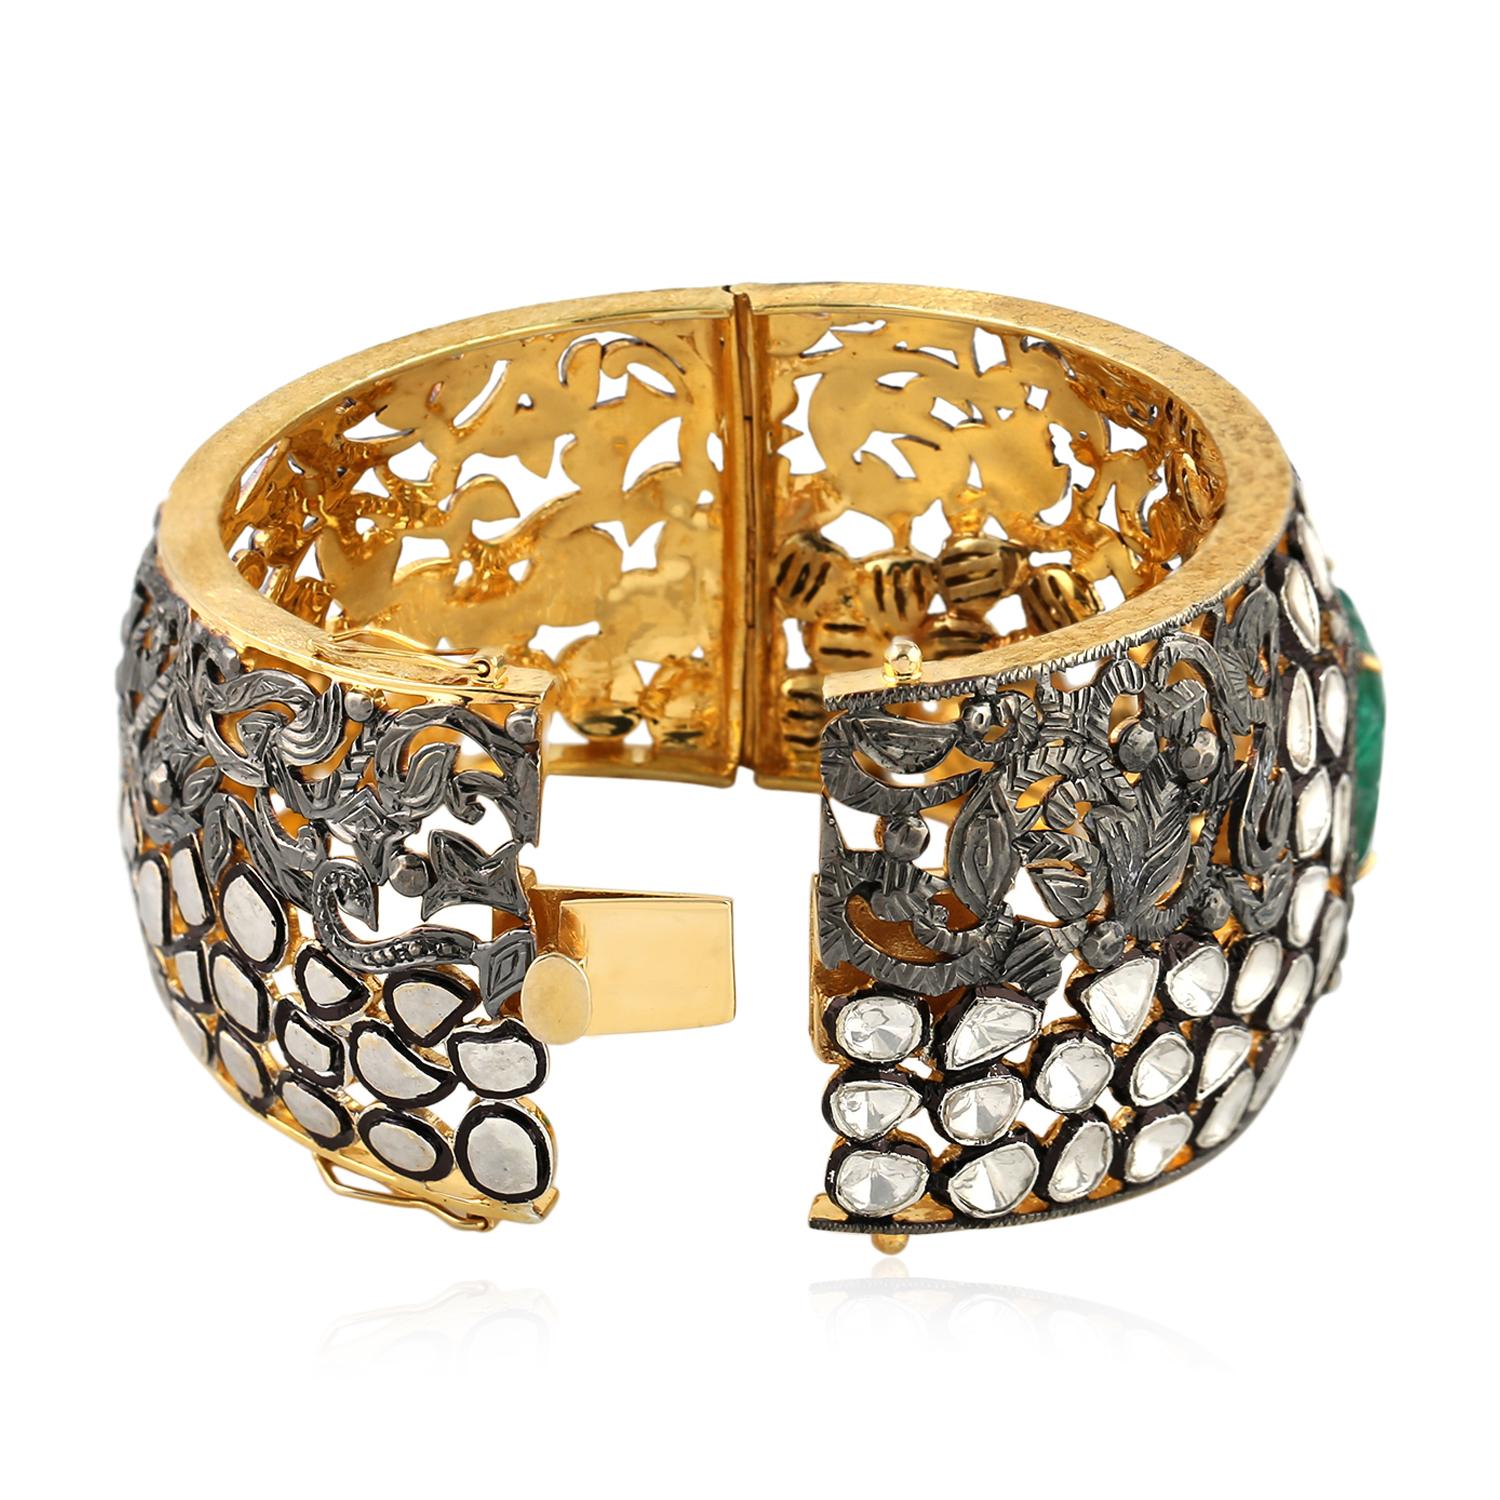 Carved Emerald & Rose Cut Diamond Cuff Bracelet In 18k Gold & Silver In New Condition For Sale In New York, NY